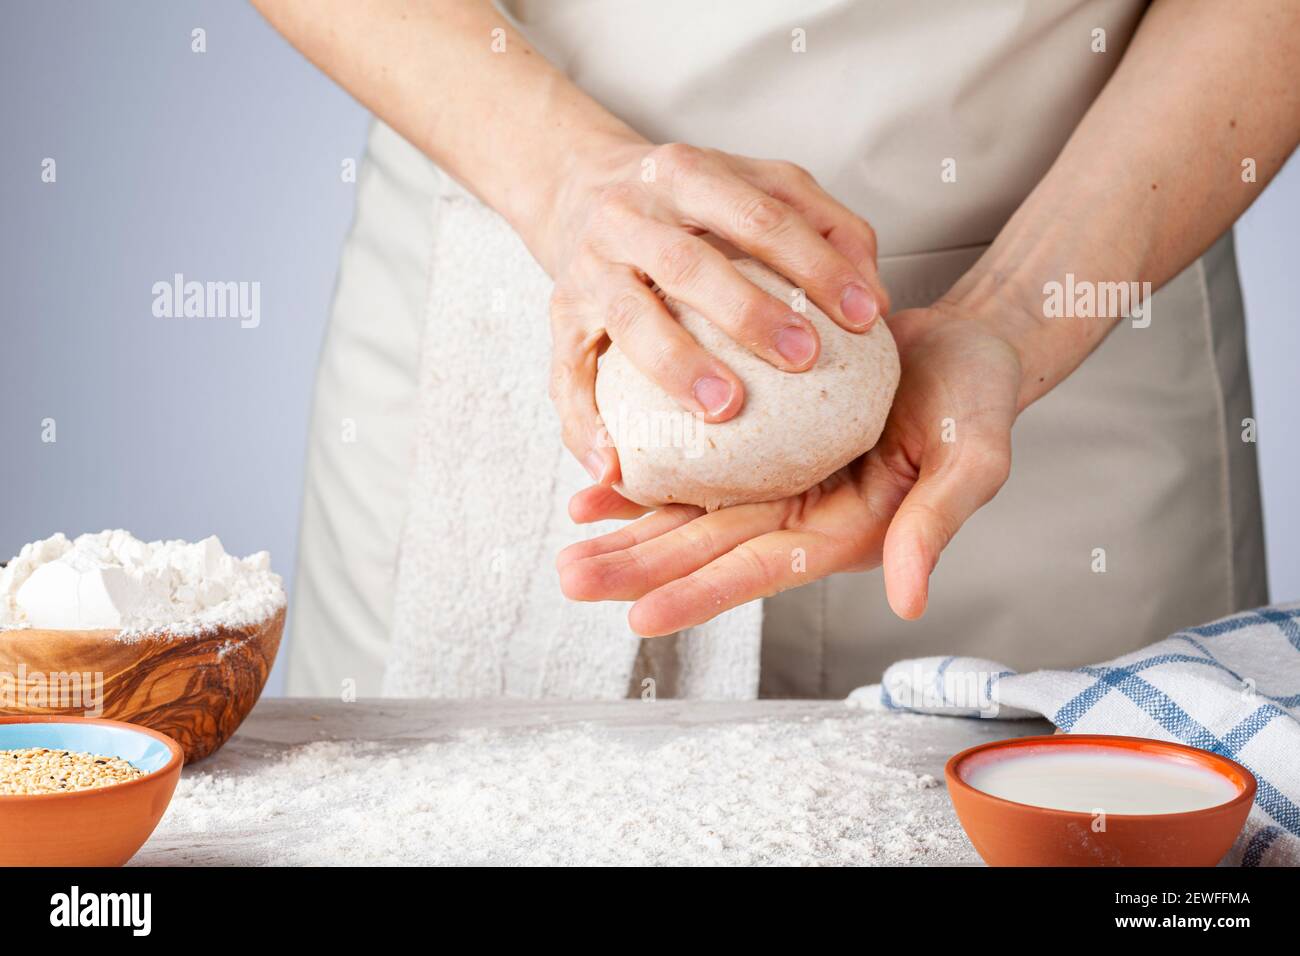 Bread making dough in a bowl Stock Photo - Alamy